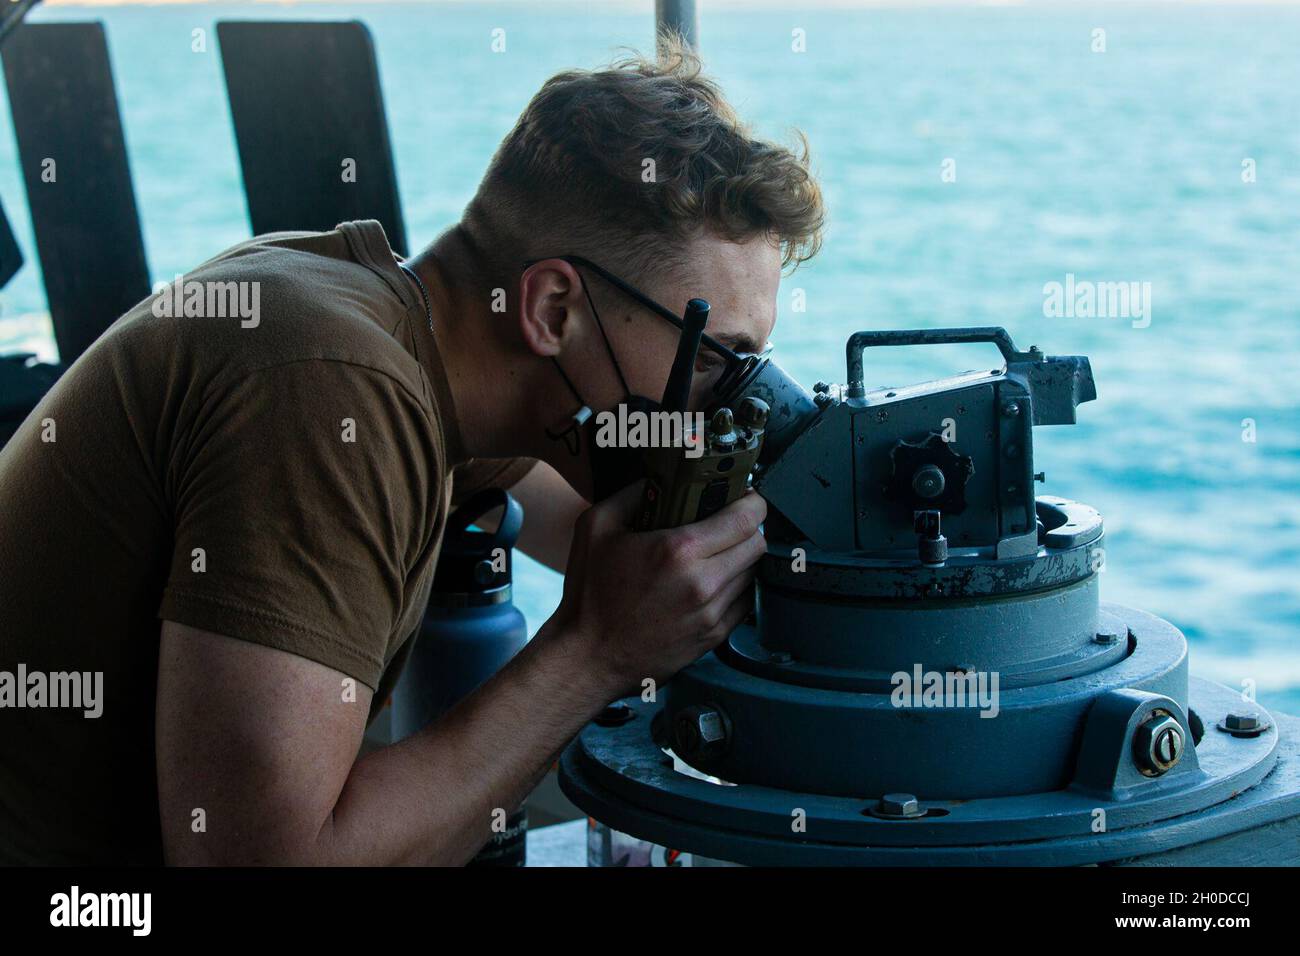 210131-A-BD272-0106 ARABIAN GULF (Jan. 31, 2021) - Information Systems Technician 2nd  Class Ryan Way, assigned to patrol coastal ship USS Chinook (PC 9), takes bearings using a  telescopic alidade in the Arabian Gulf, Jan. 31. Chinook is deployed to the U.S. 5th Fleet area of  operations in support of naval operations to ensure maritime stability and security in the Central  Region, connecting the Mediterranean and Pacific through the western Indian Ocean and three  strategic choke points. Stock Photo